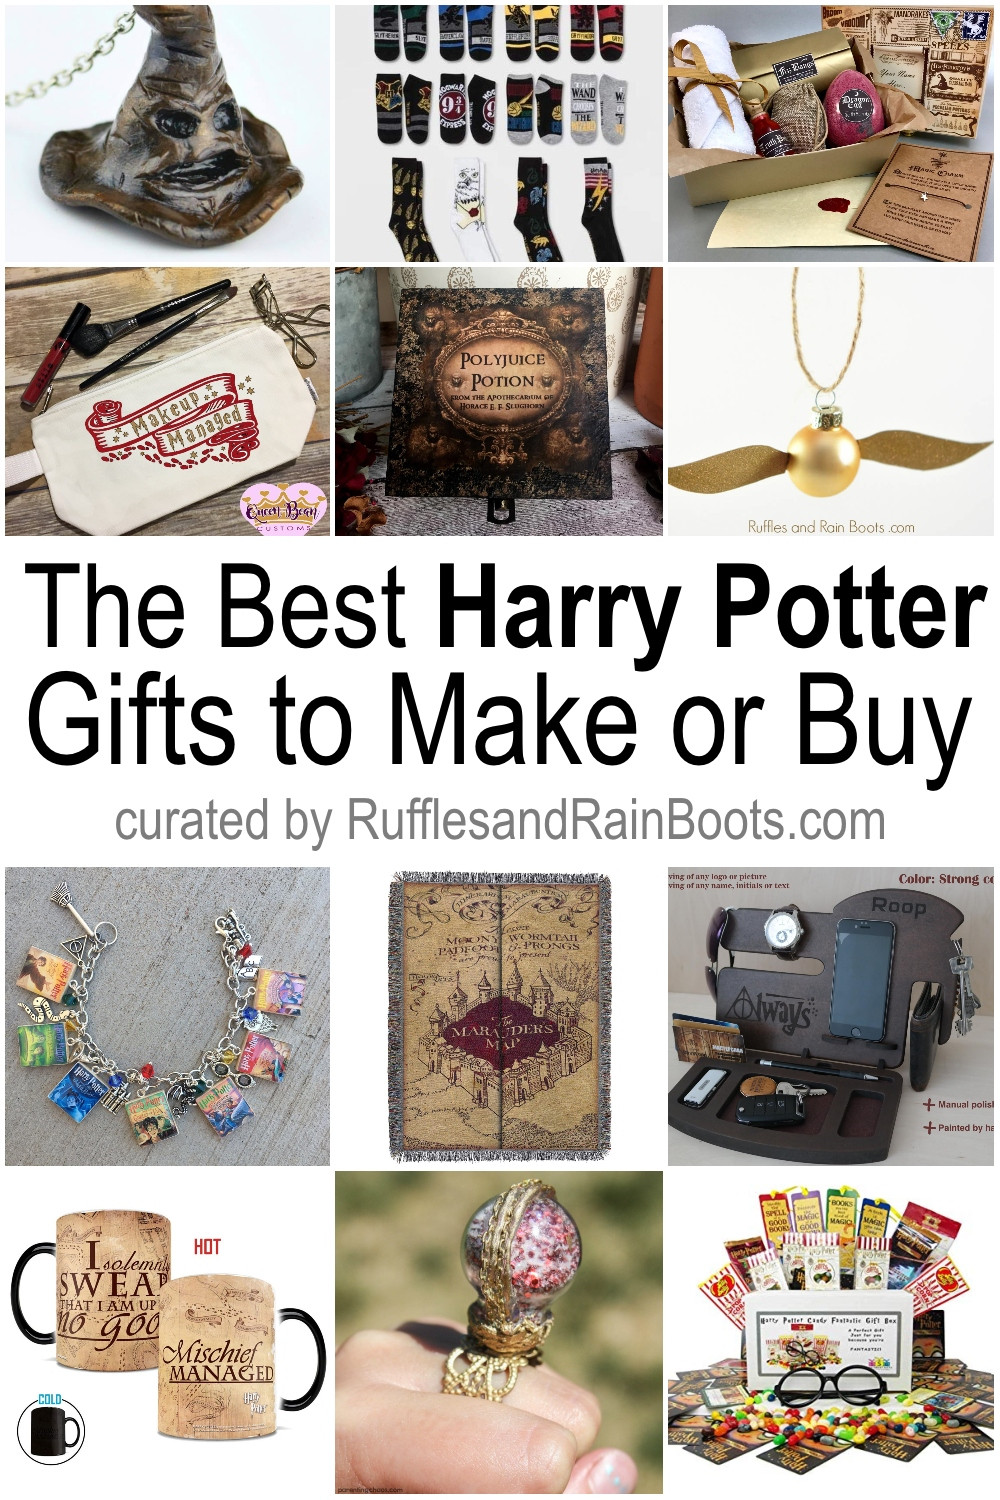 Harry Potter Birthday Gift Ideas
 The Best Harry Potter Gift Ideas to Buy or DIY